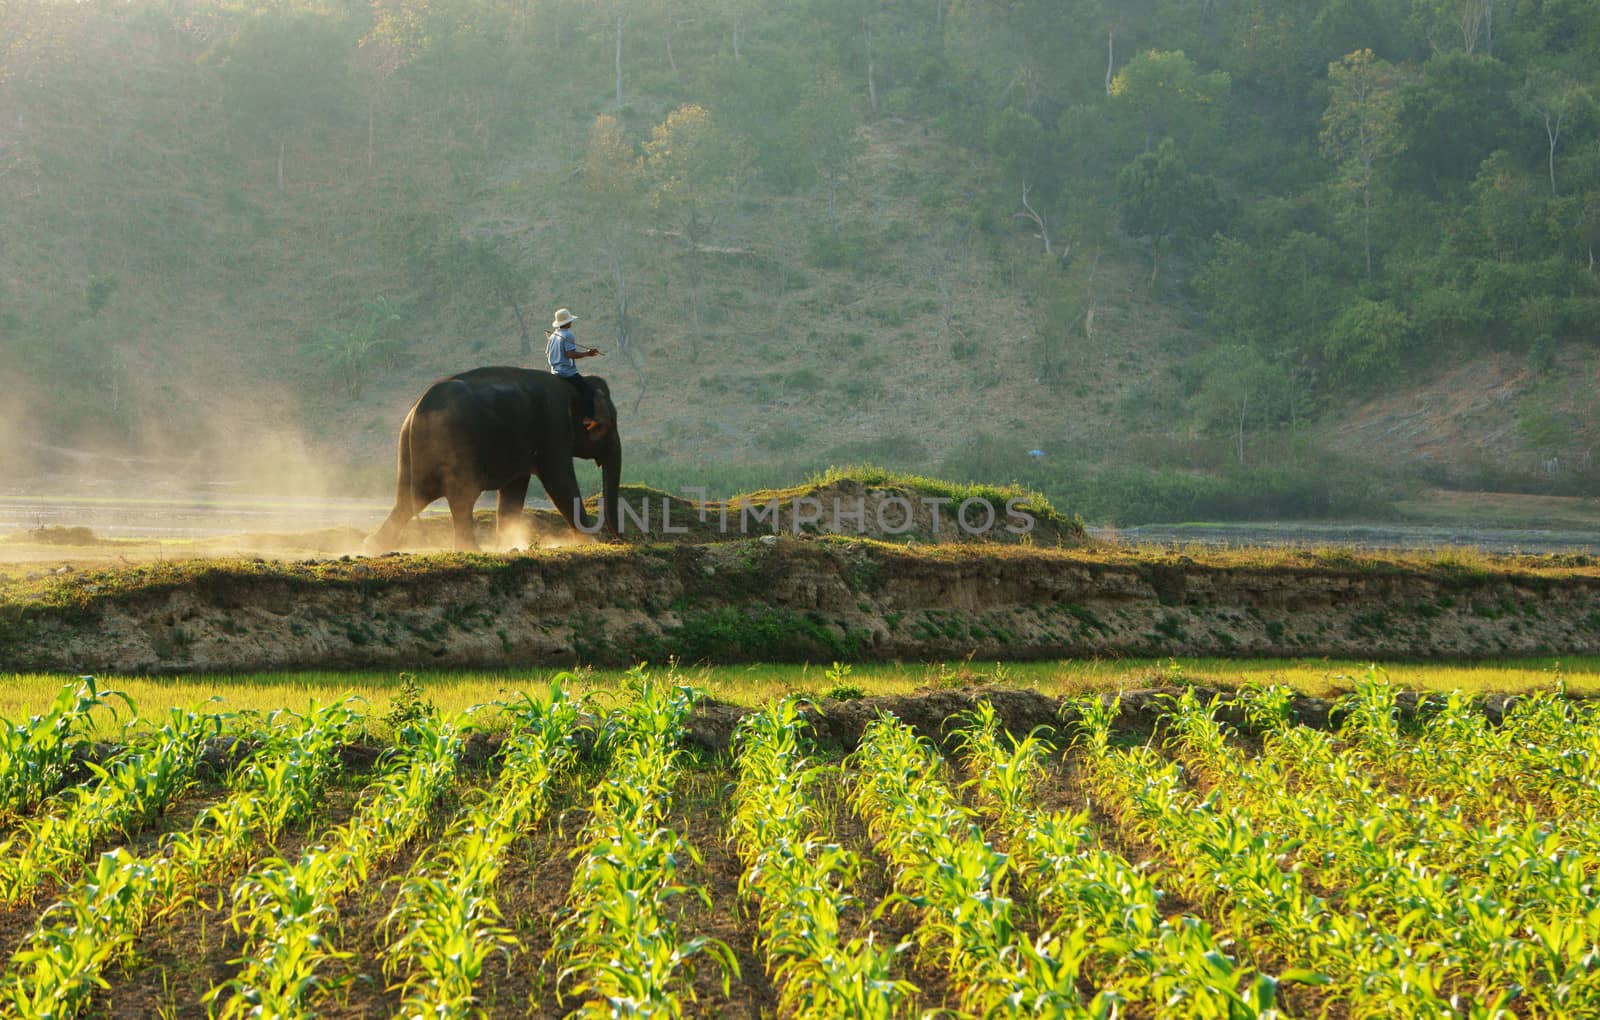 People ride elephant on path at countryside by xuanhuongho